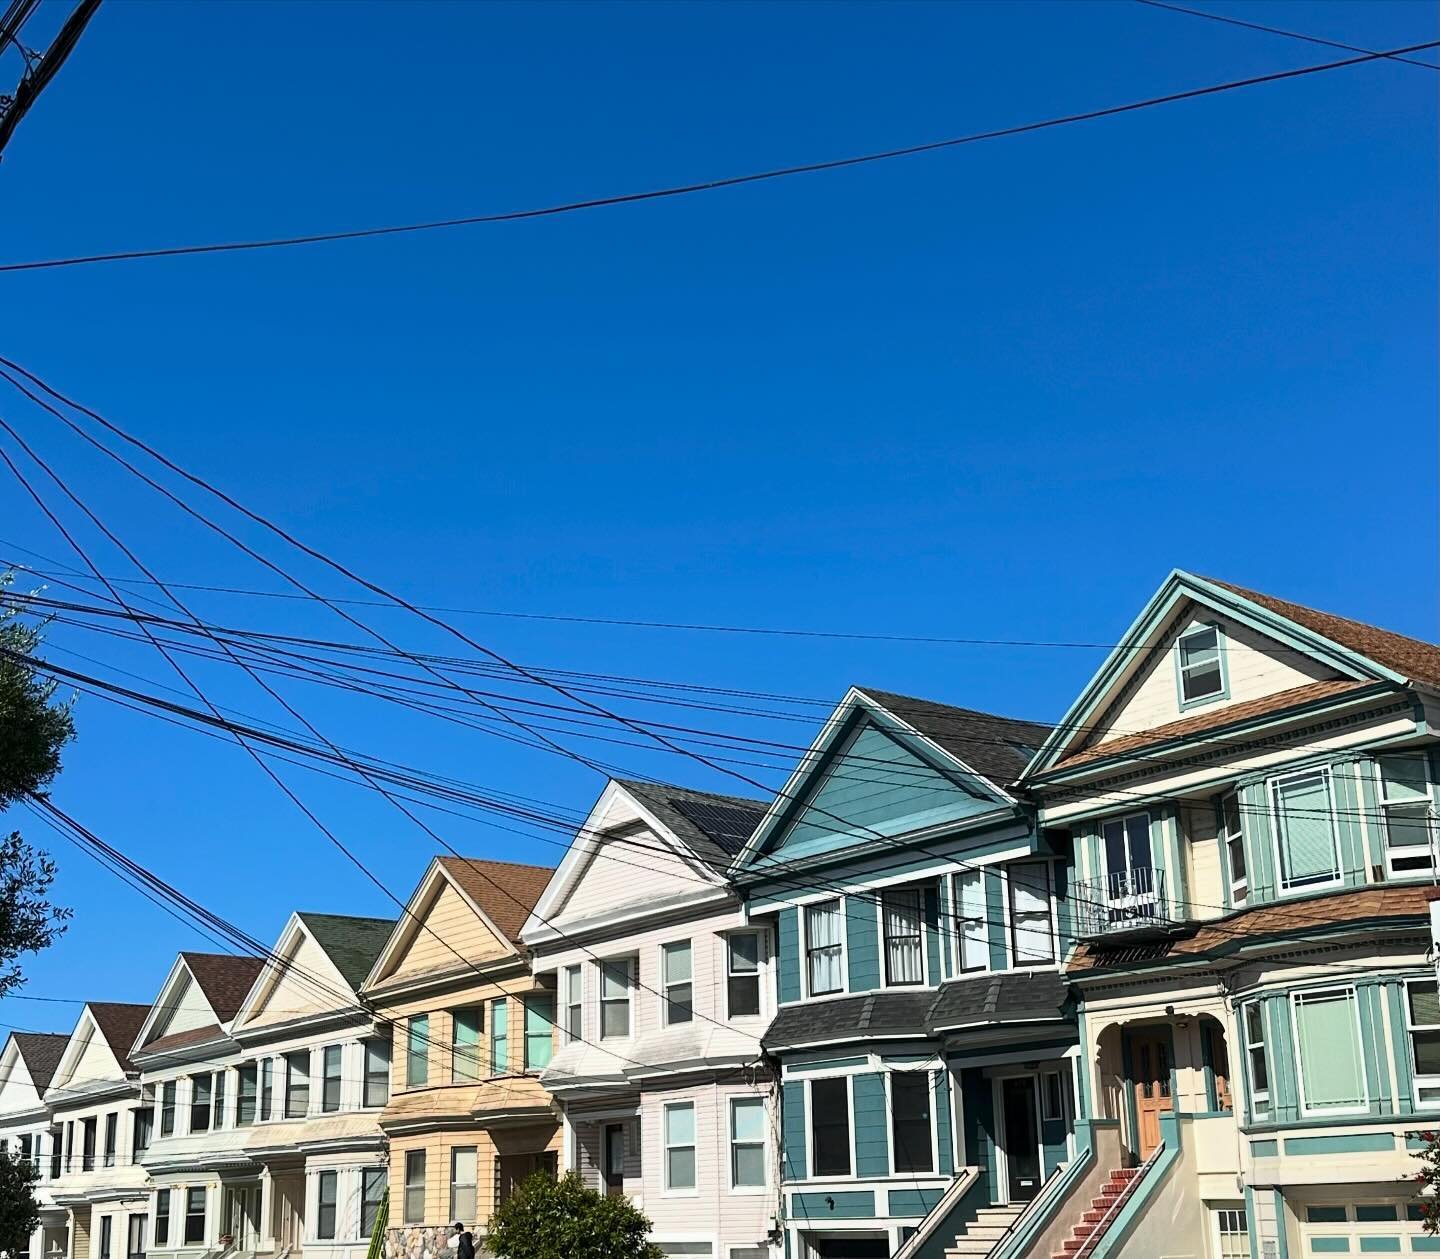 Name this neighborhood! One of my absolute favorite things to do is wander around other neighborhoods and and admire homes that are so different than mine. These caught my eye this afternoon! 

#sfneighborhoods #sanfrancisco #lovewhereyoulive #sfreal